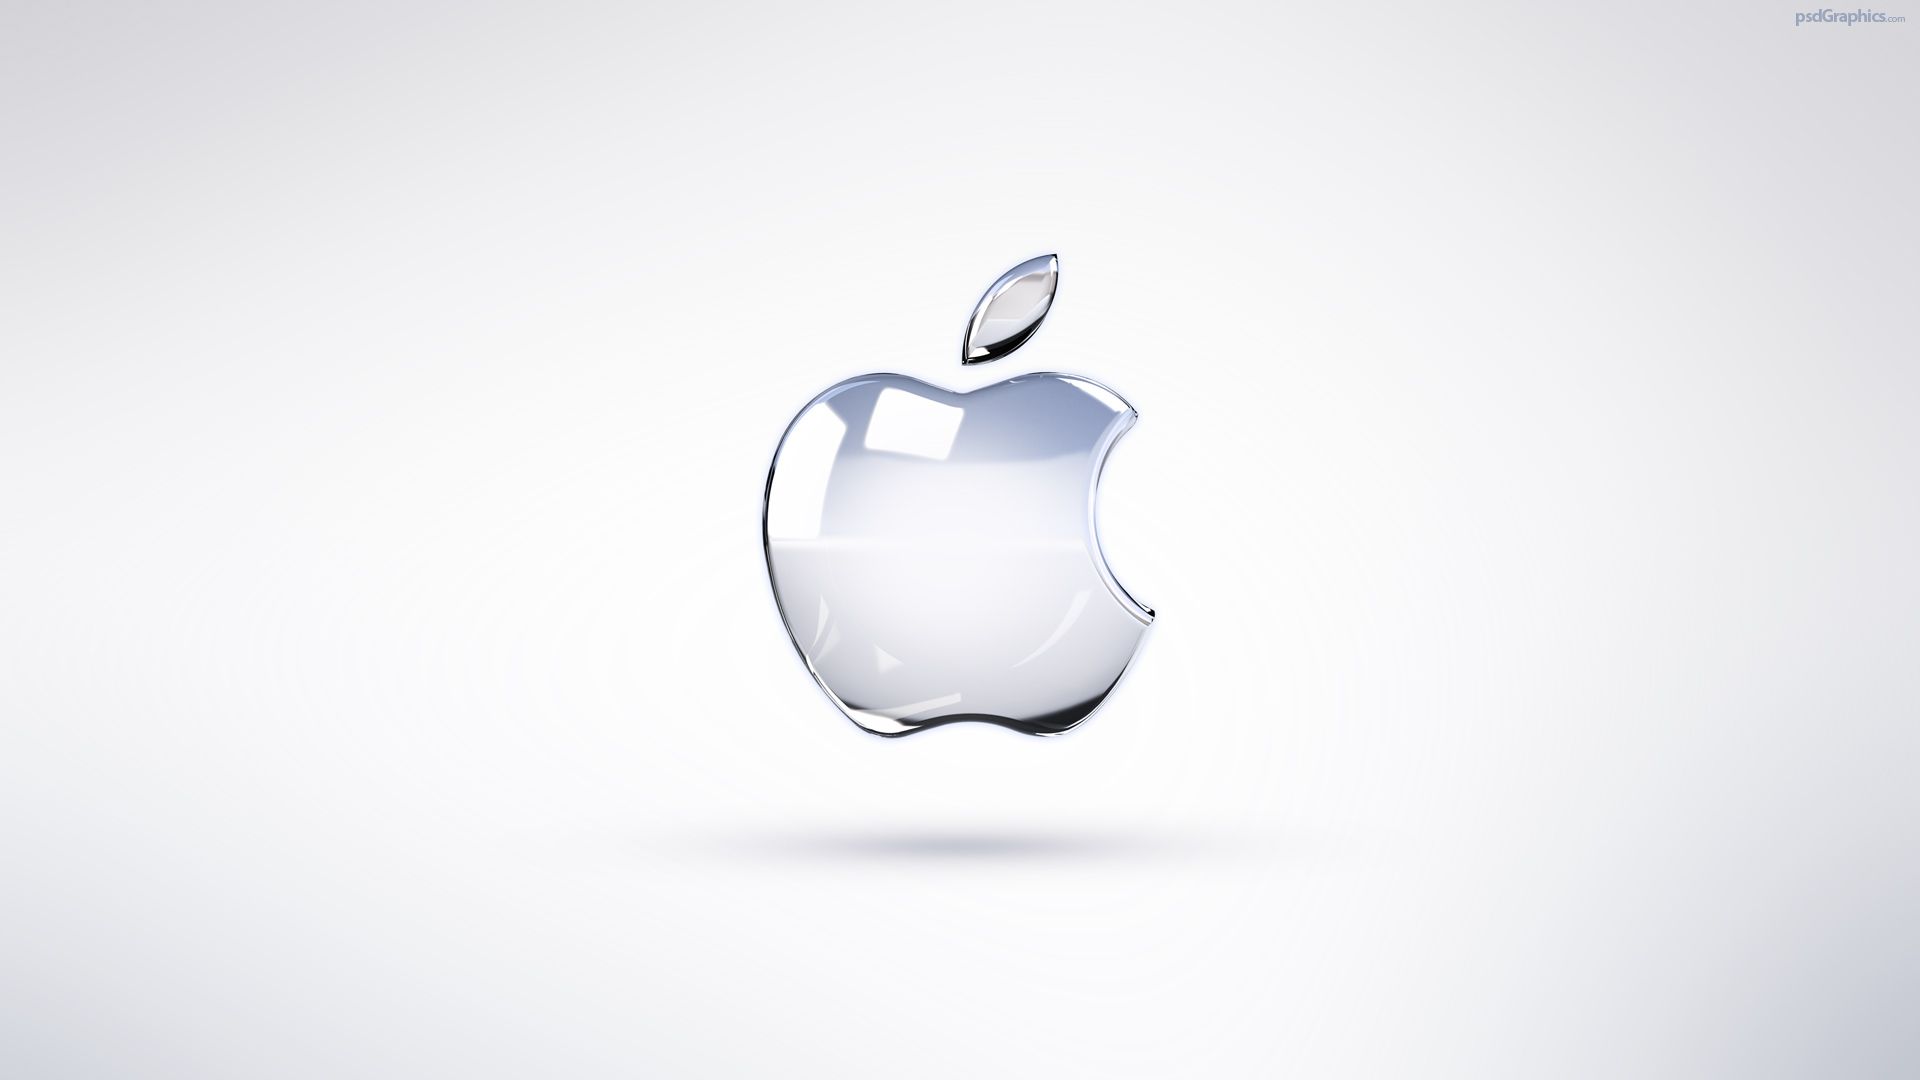 Hd Apple Images Wallpapers